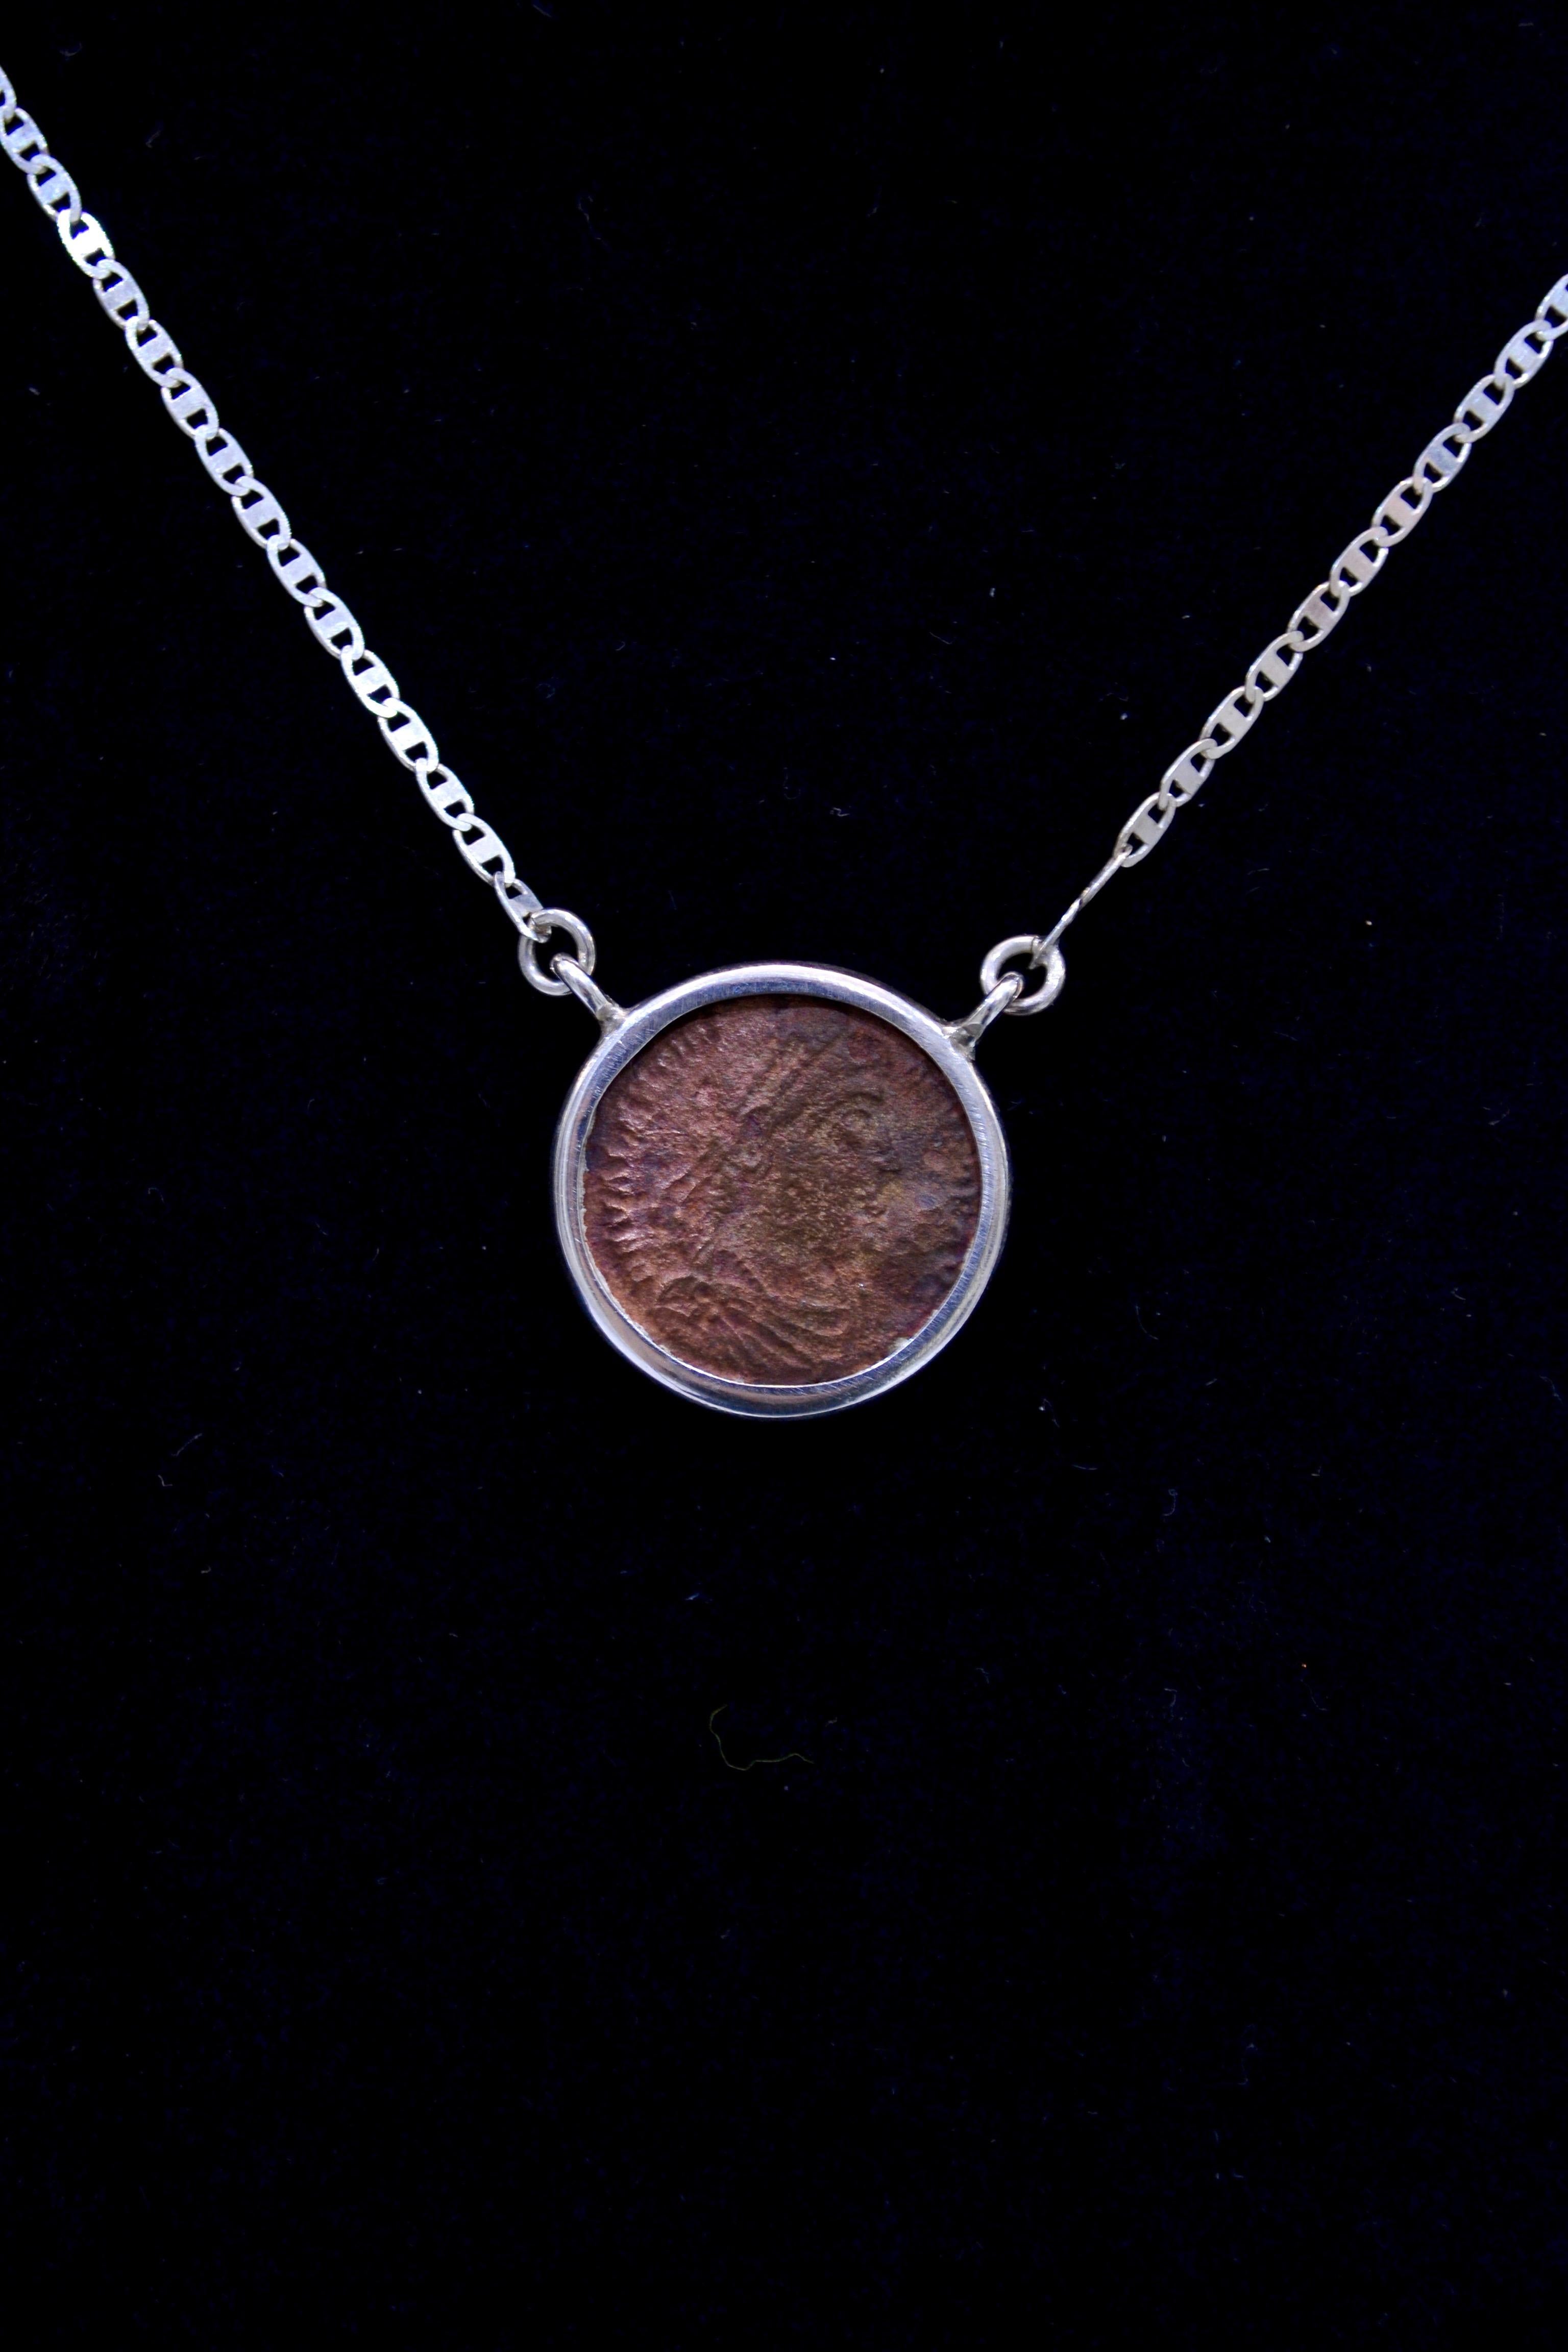 Antique Roman copper coin mounted on contemporary silver necklace. Ready to be worn!

Fully Flavius Julius Valens Augustus, he was given the eastern half of the empire by his brother Valentinian I after the latter's accession to the throne. Valens,